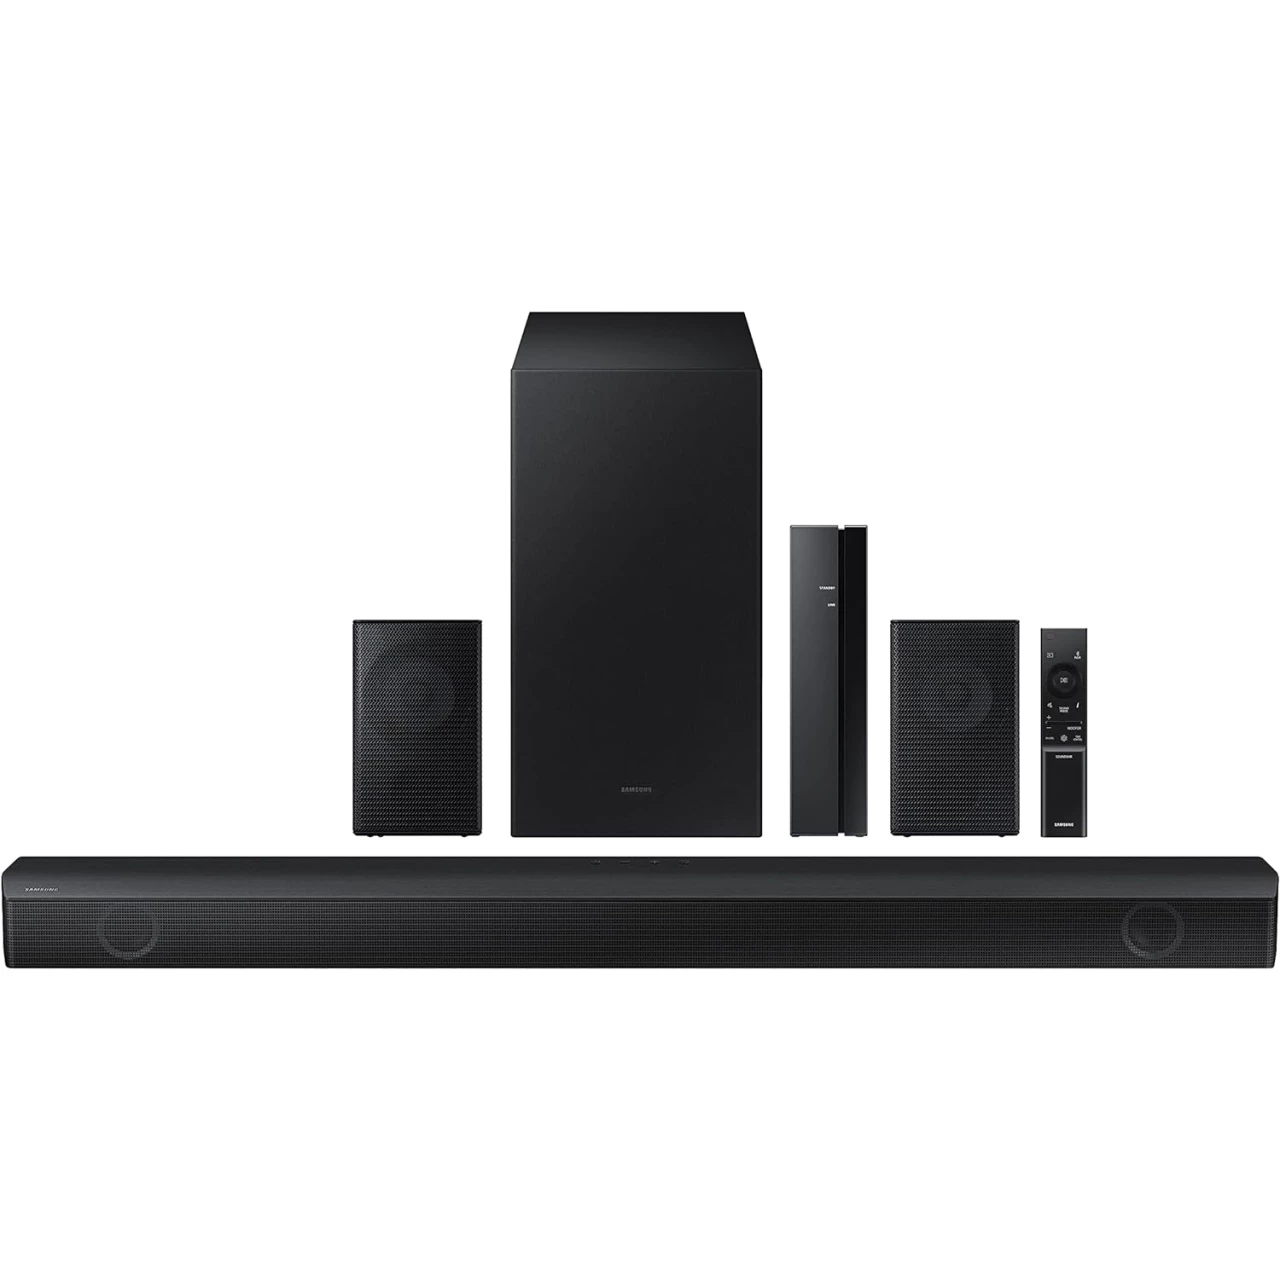 SAMSUNG HW-B57C B-Series 4.1ch Soundbar w/Dolby Audio/DTS Virtual X, Game Mode, Wireless Bluetooth TV Connection, Rear Speaker Kit &amp; Subwoofer Included